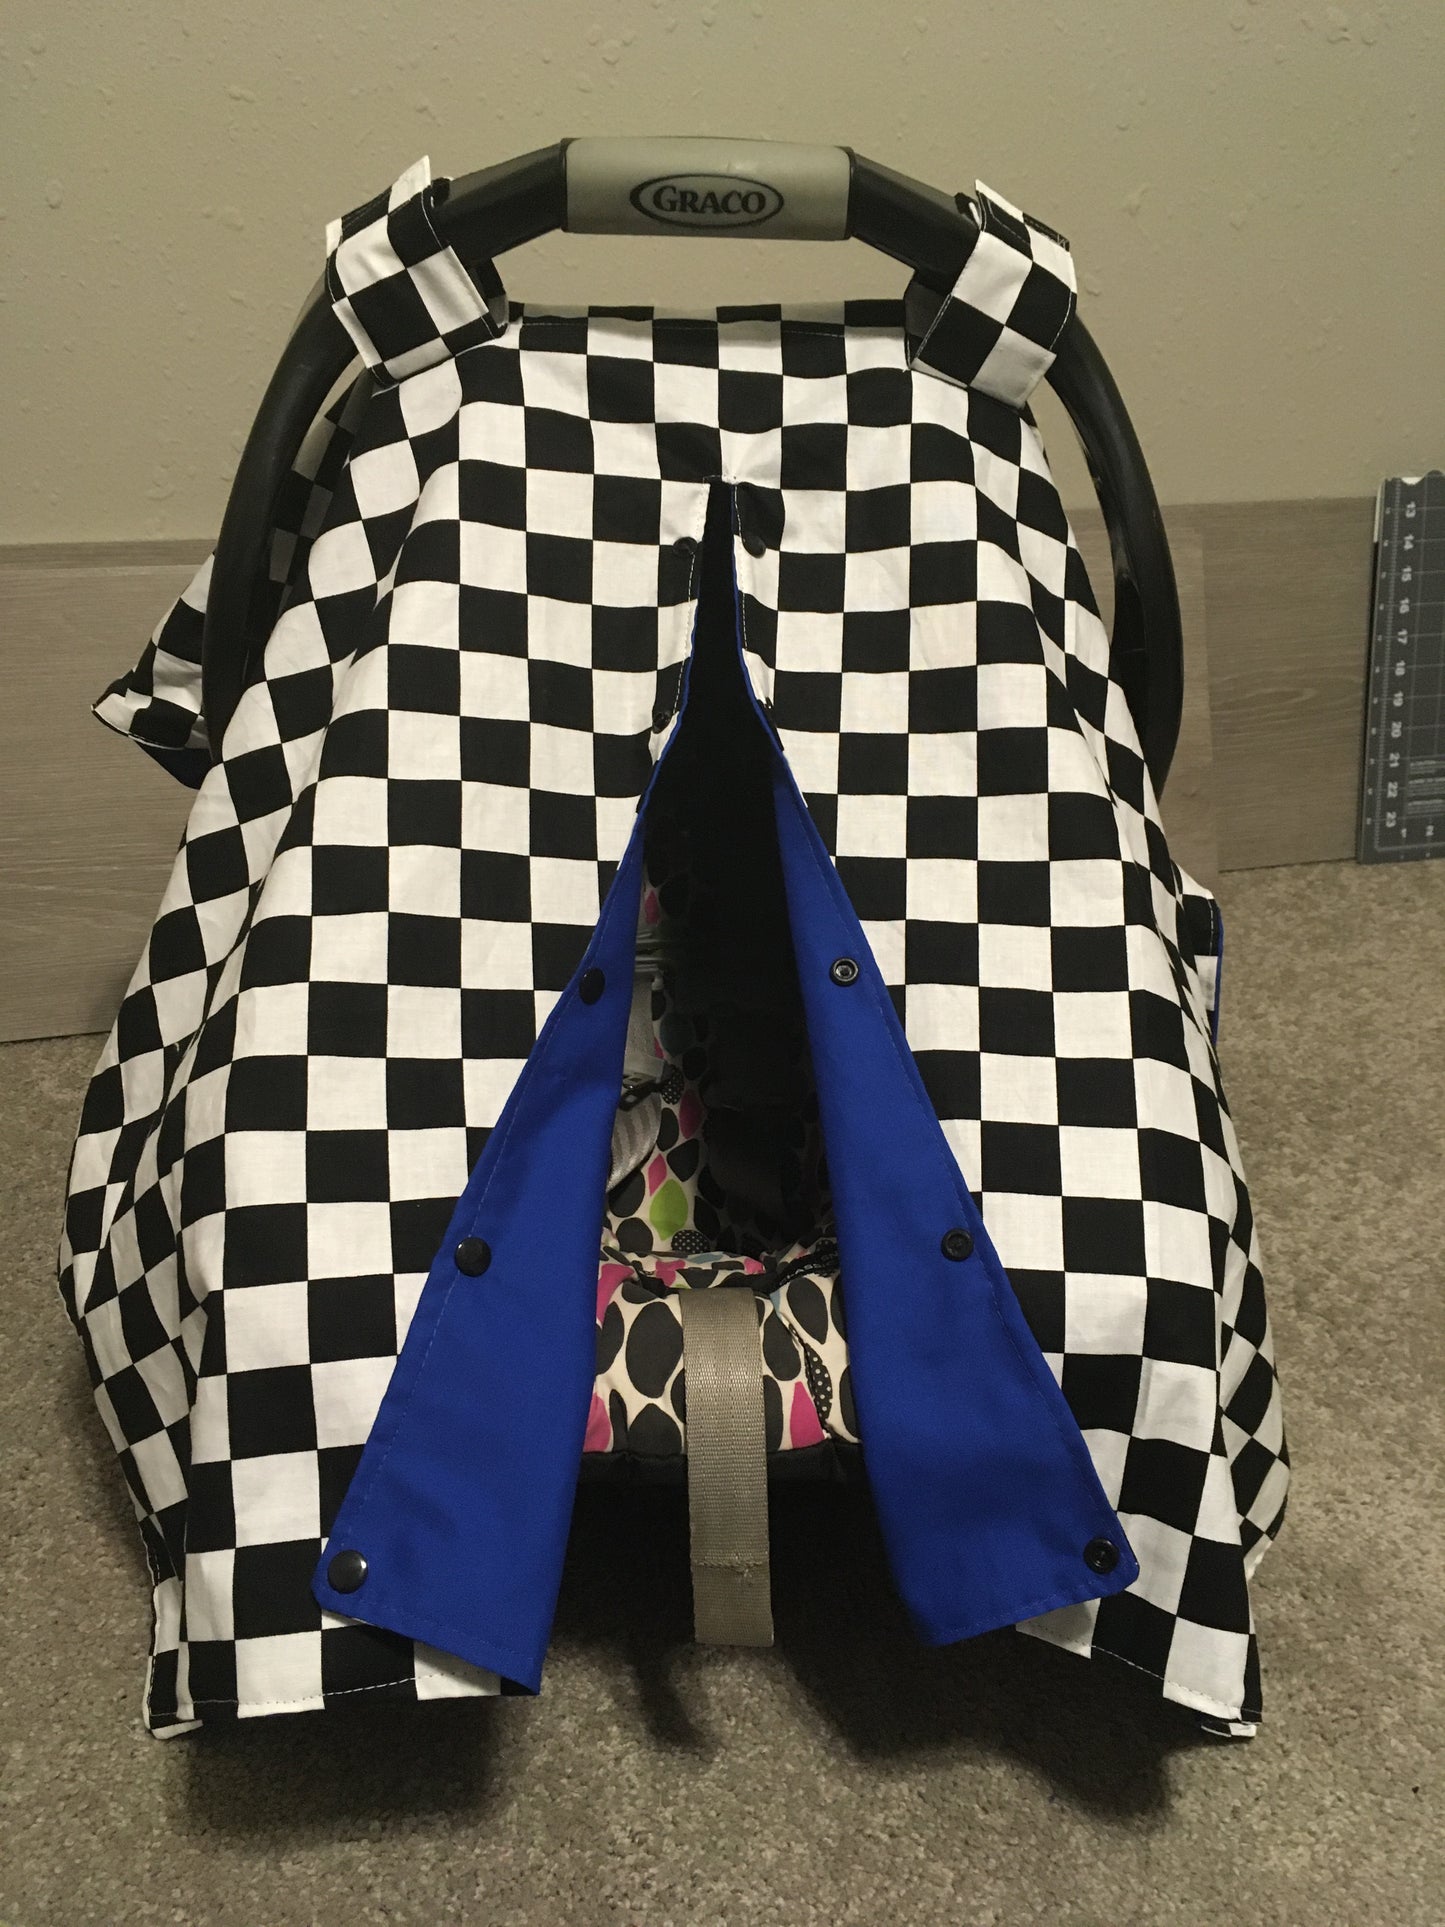 racing check canopy/car seat cover shown in royal blue cotton in the open option